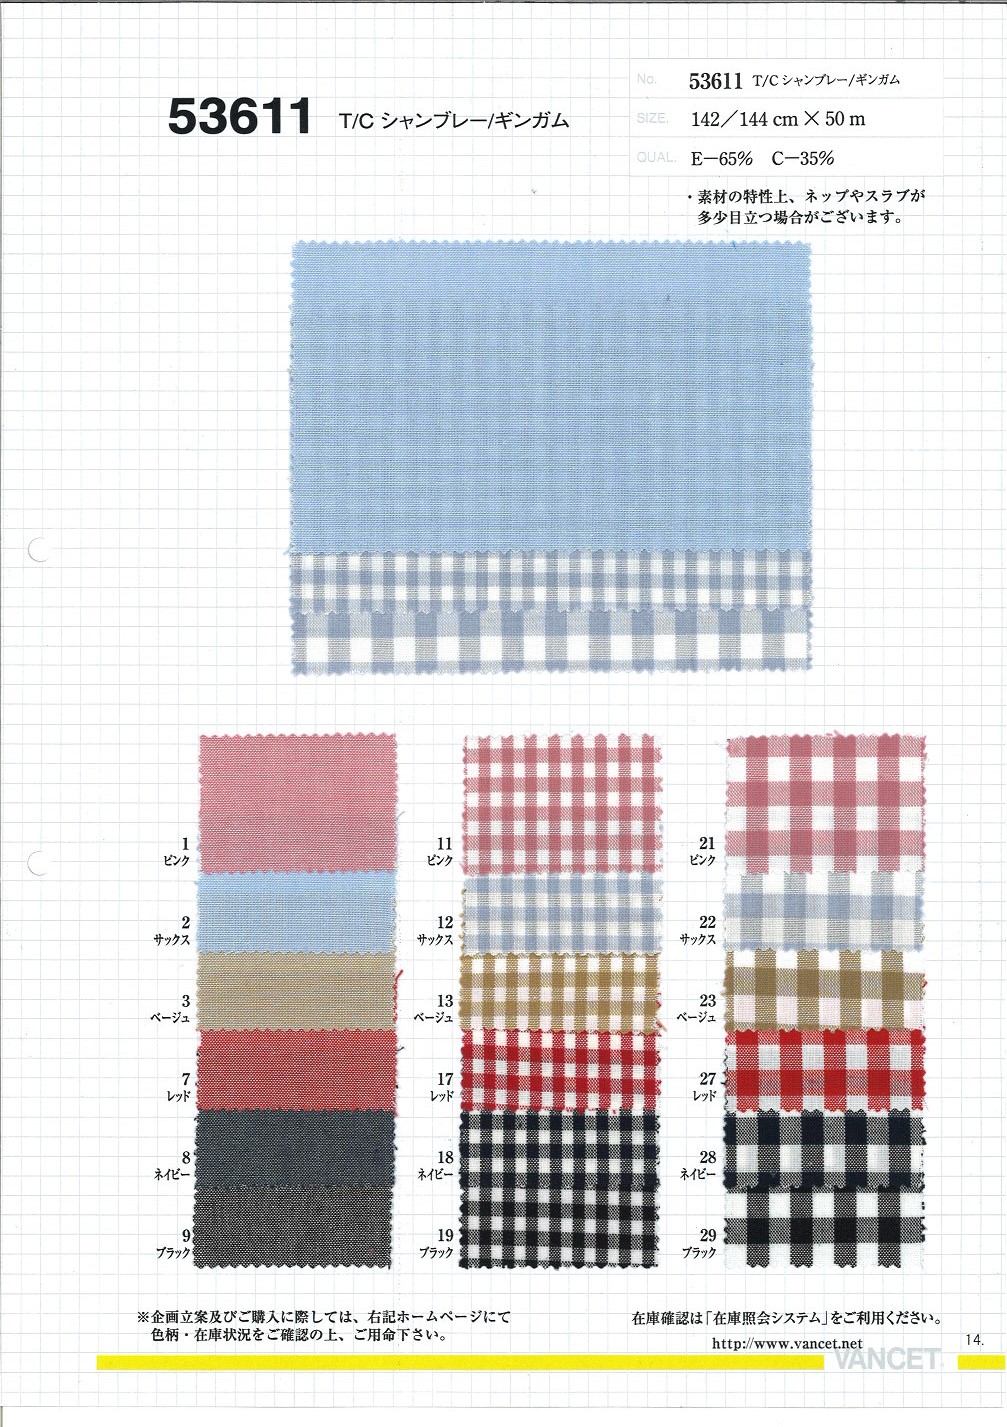 53611 T/C Chambray/Gingham[Textile / Fabric] VANCET